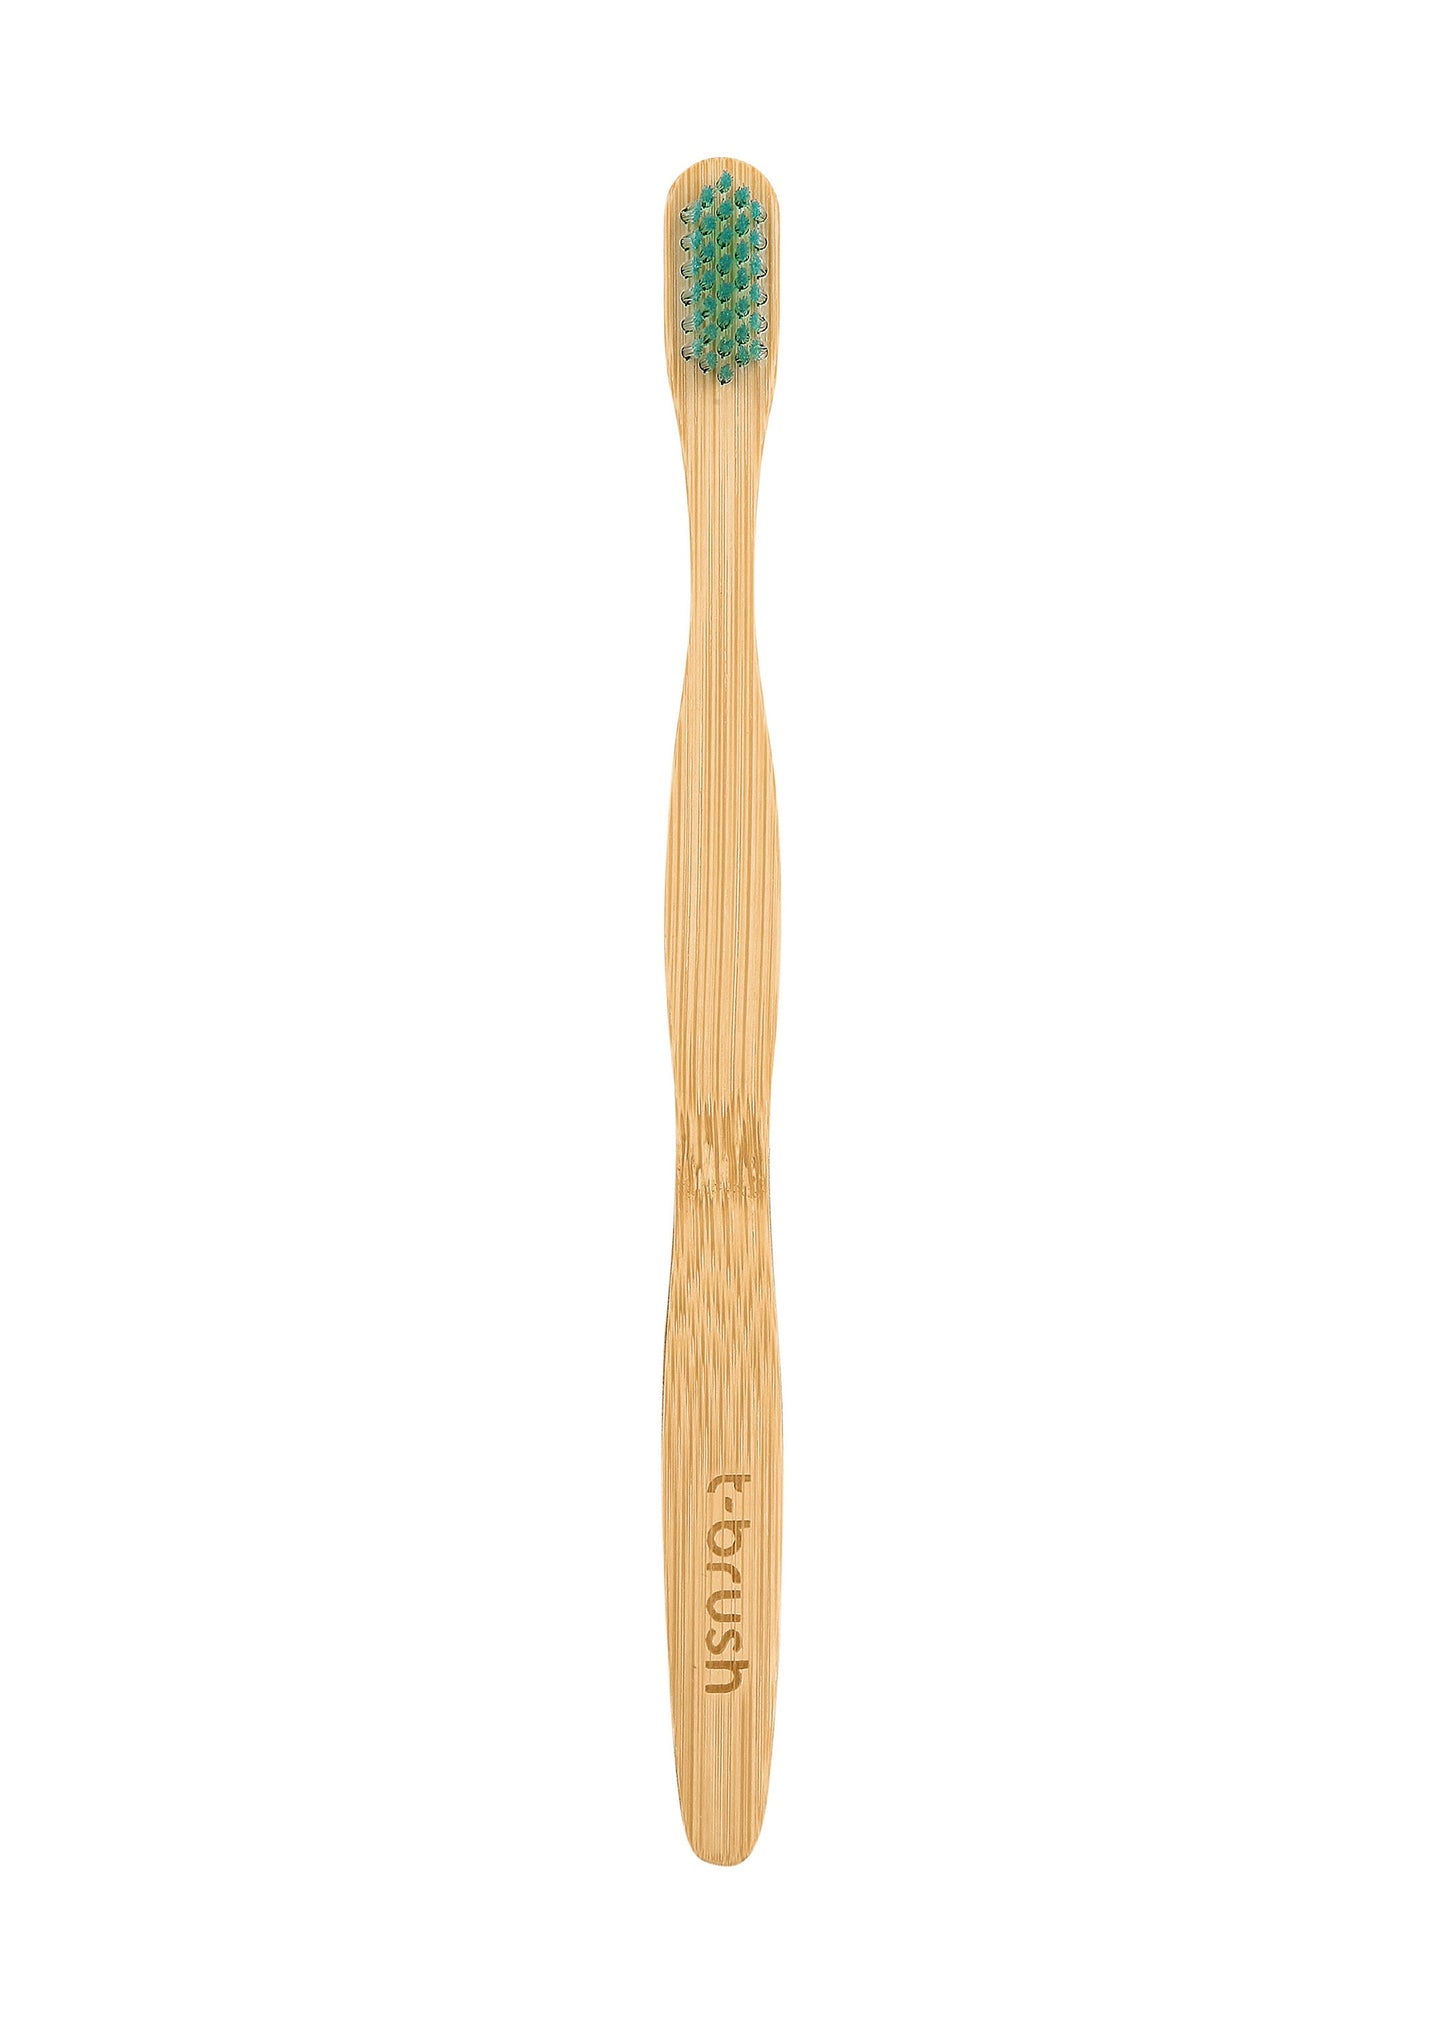 T-Brush Bamboo Toothbrush Medium Hard 4 Pieces - Dupont Bristles - The Best Duo = Dupont + Bamboo - Gift For Christmas - Natural Toothbrush